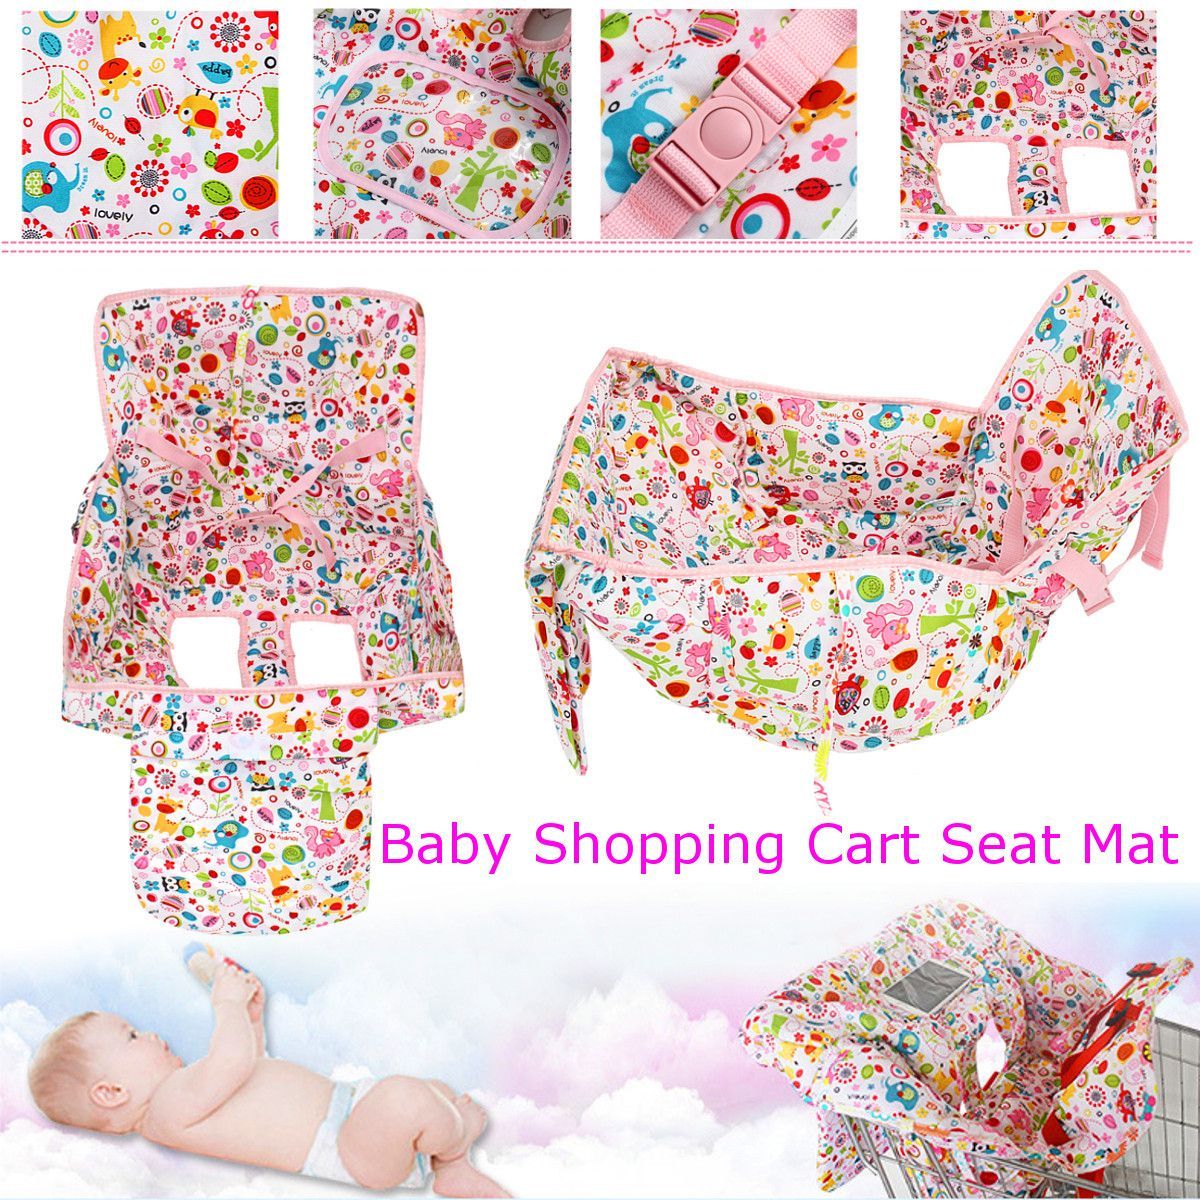 Baby-Shopping-Cart-Seat-Mat-Supermarket-Trolley-Kids-Protector-Cover-Mat-Cushion-1557105